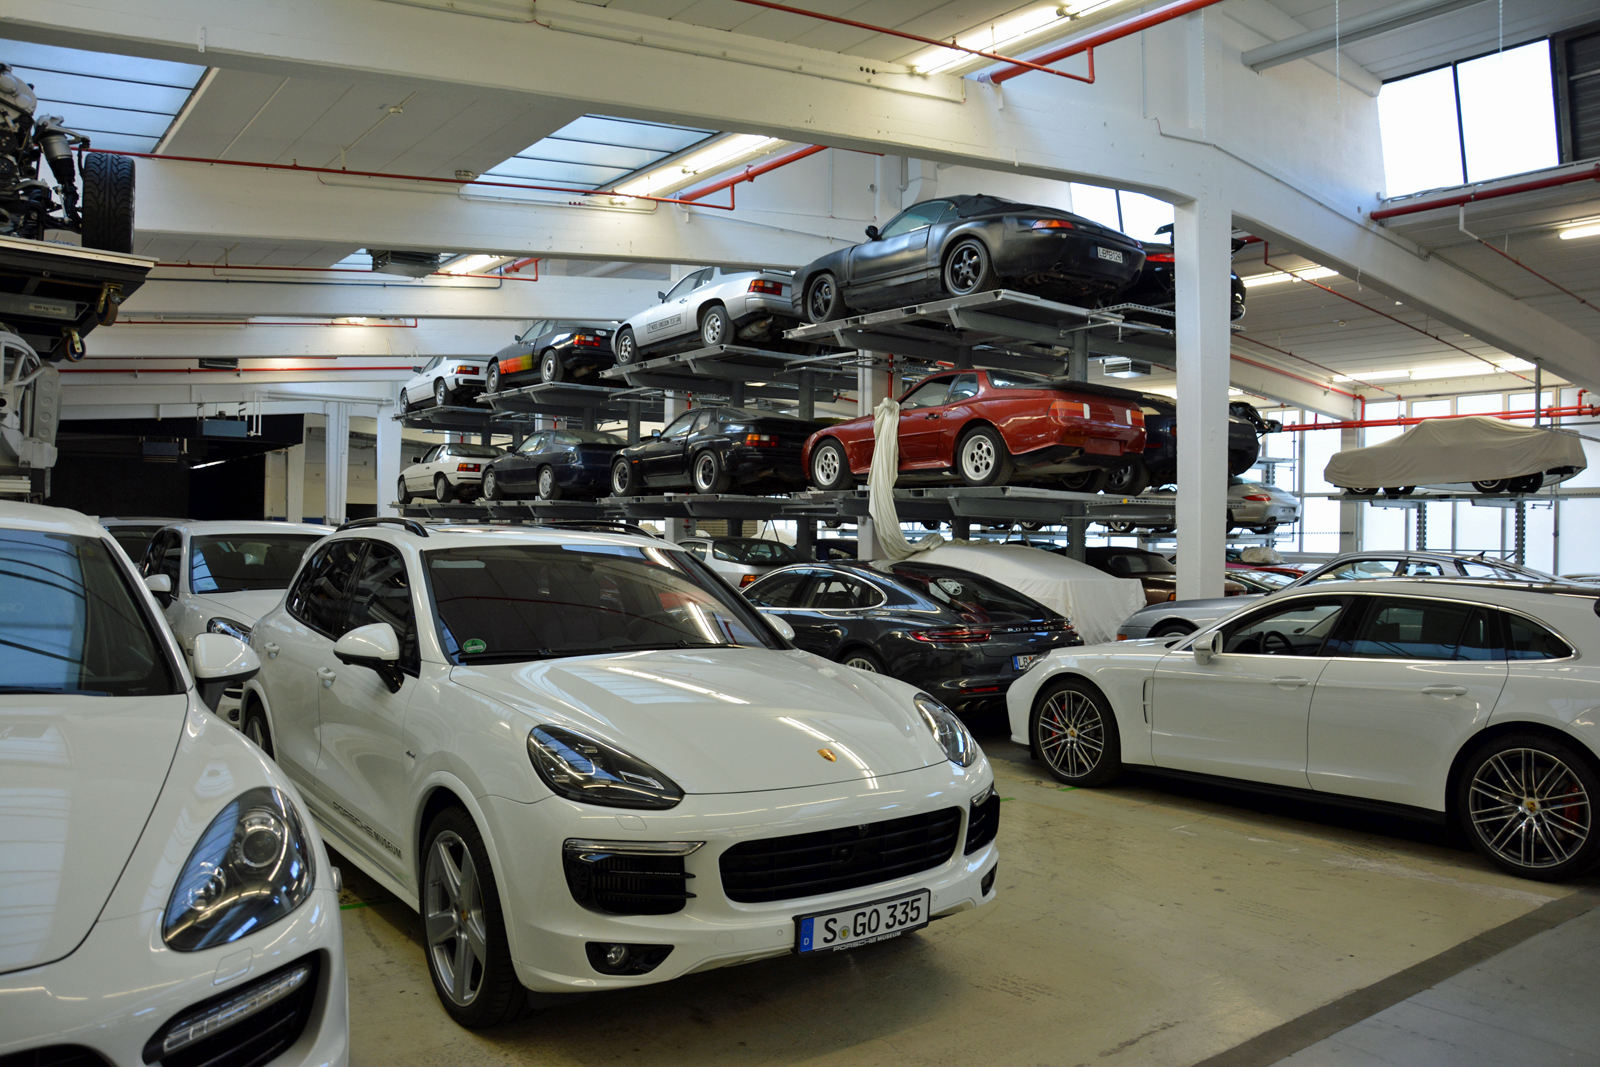 <p>Part of the warehouse is dedicated to front-engined cars like the 924, the 944, the Cayenne and the Panamera. One of Porsche’s most recent models, the Panamera Sport Turismo, already has a spot in the collection next to the sedan version. It’s the most <strong>recent addition</strong> to the vault.</p>